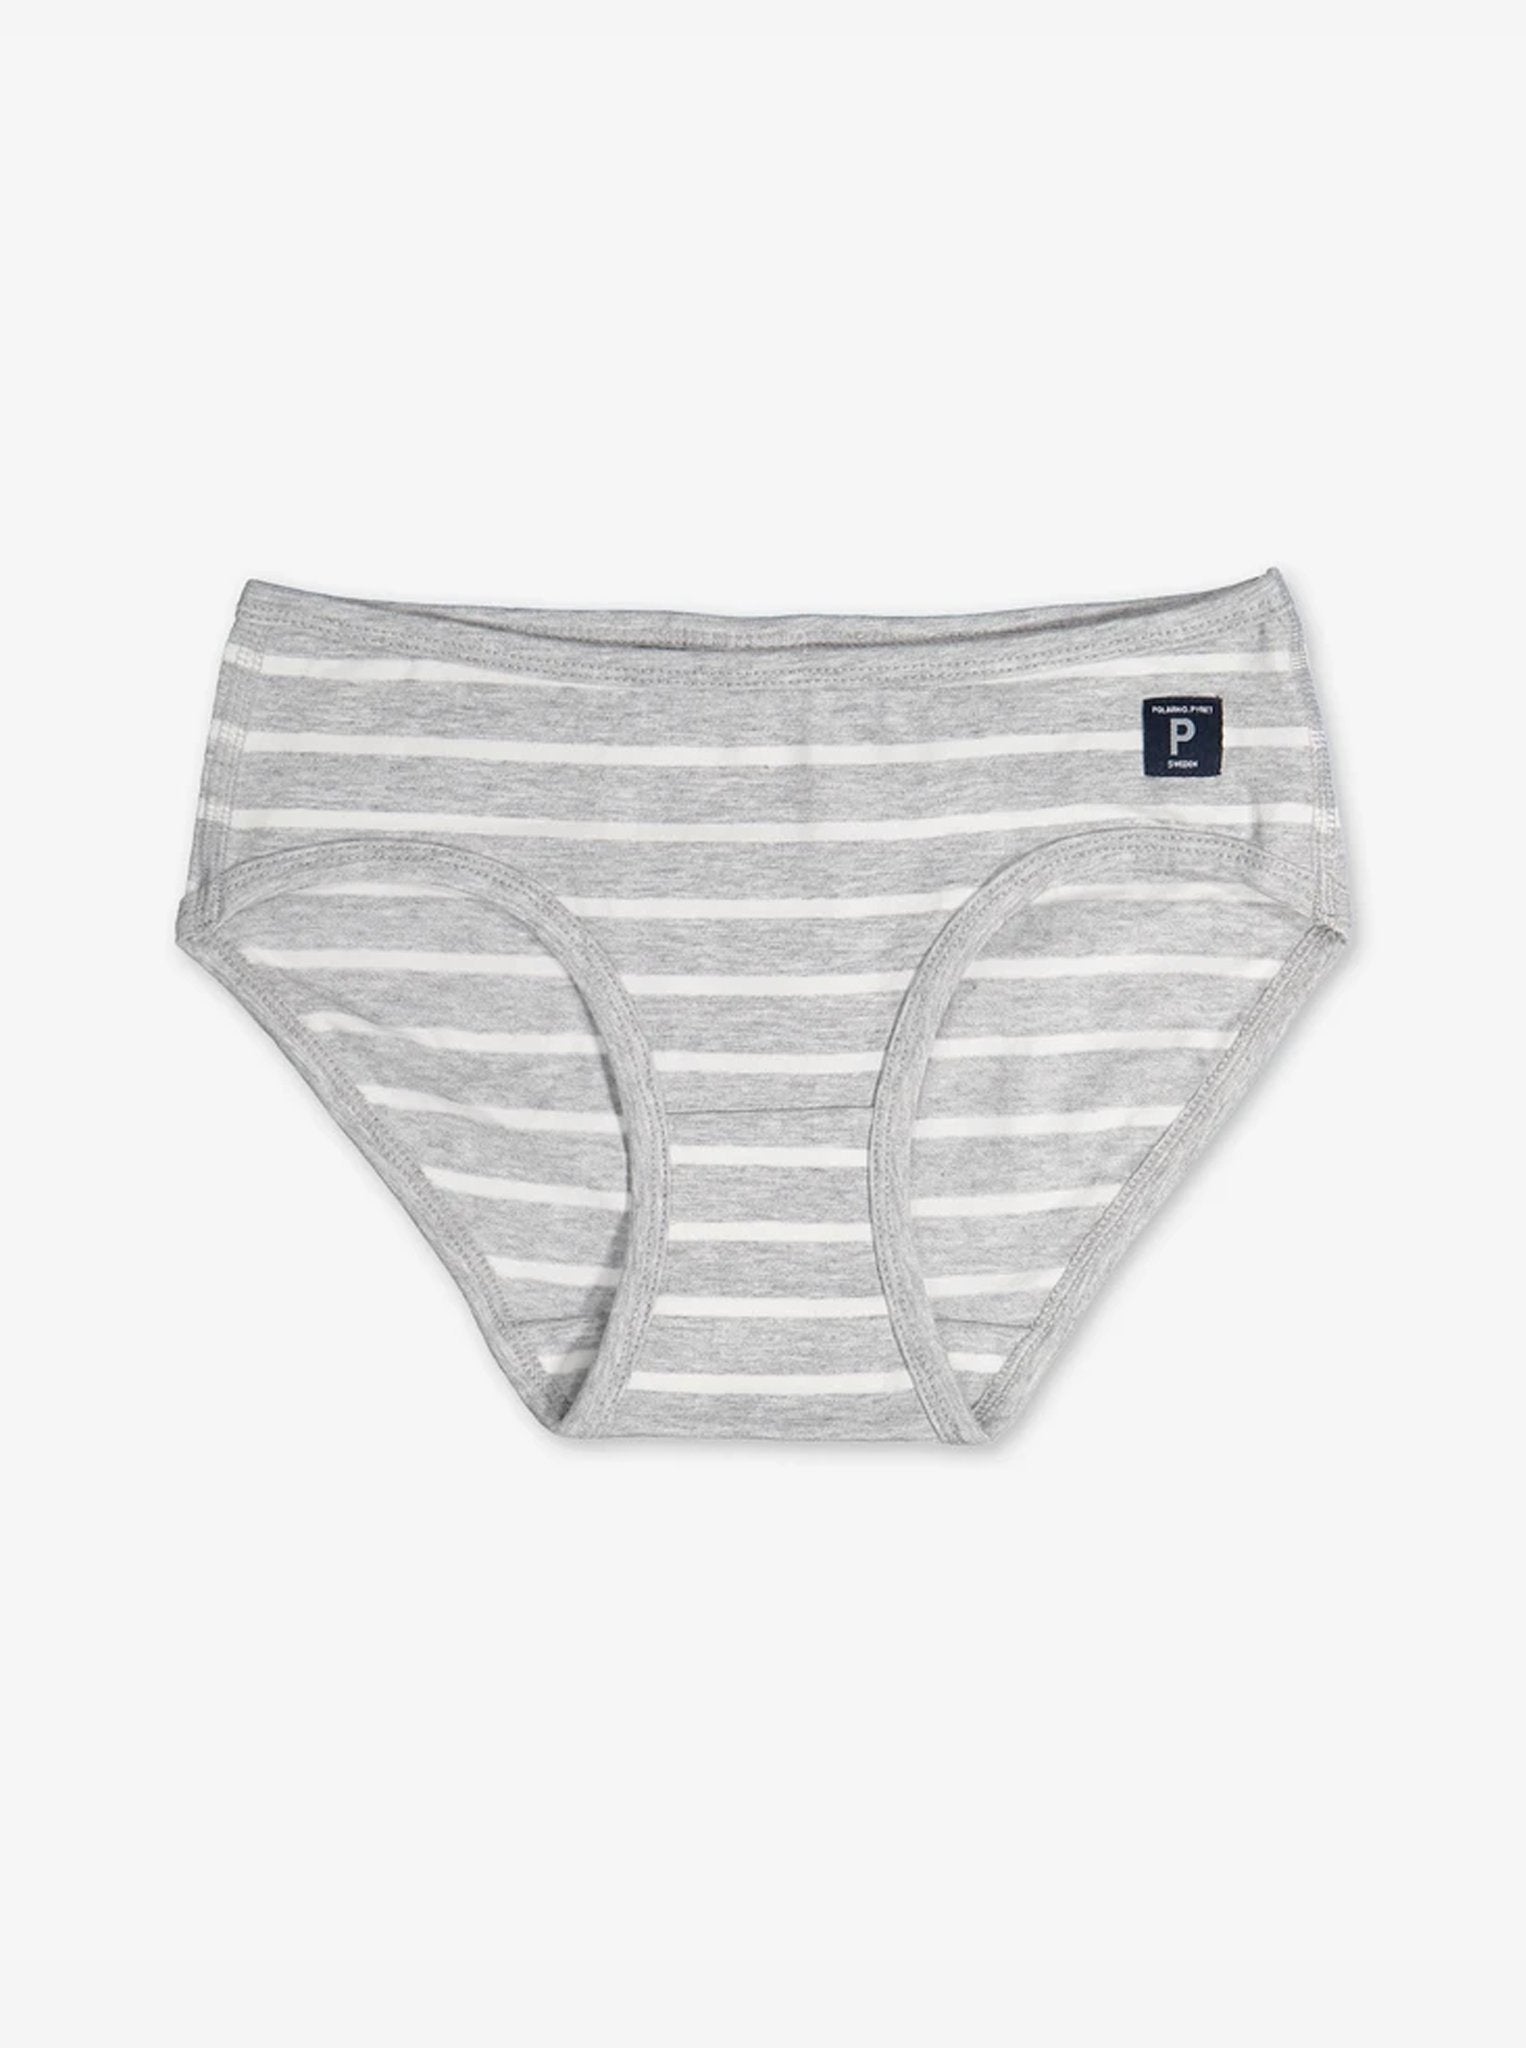 girls grey and white striped briefs, comfortable pants, organic cotton polarn o. pyret  